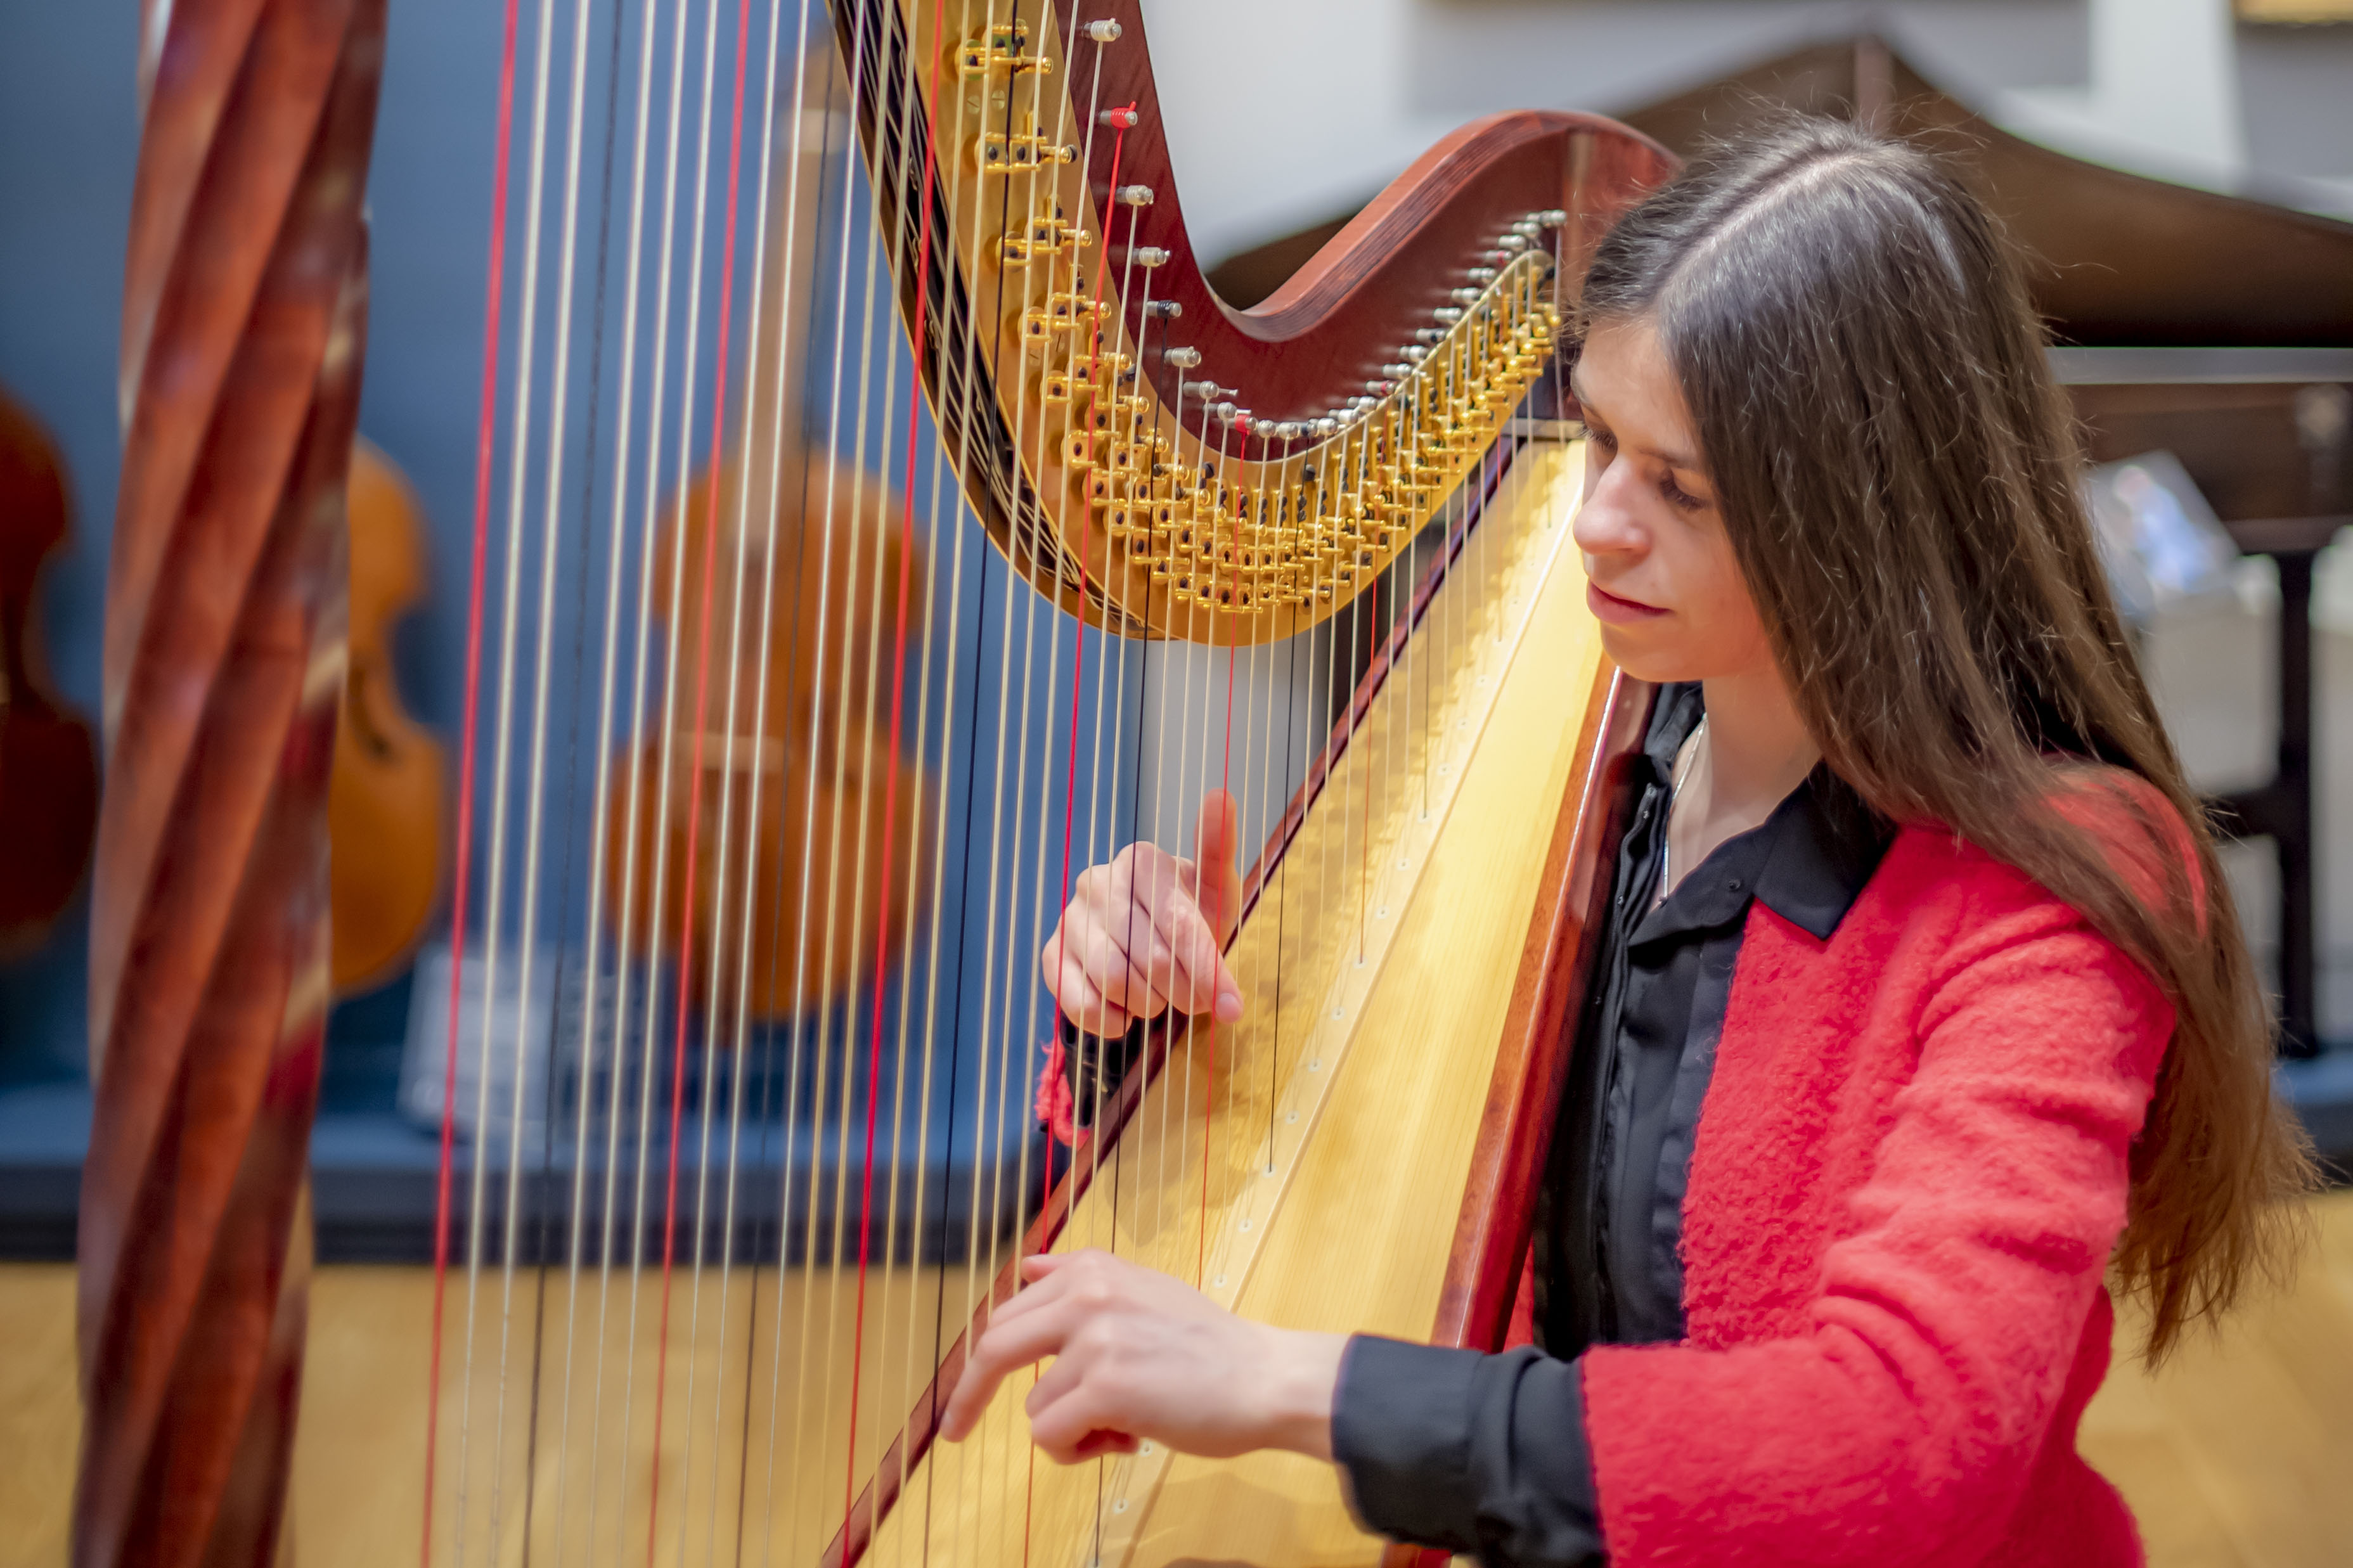 A harpist wearing a black shirt and red blazer performs in the Royal College of Music Museum